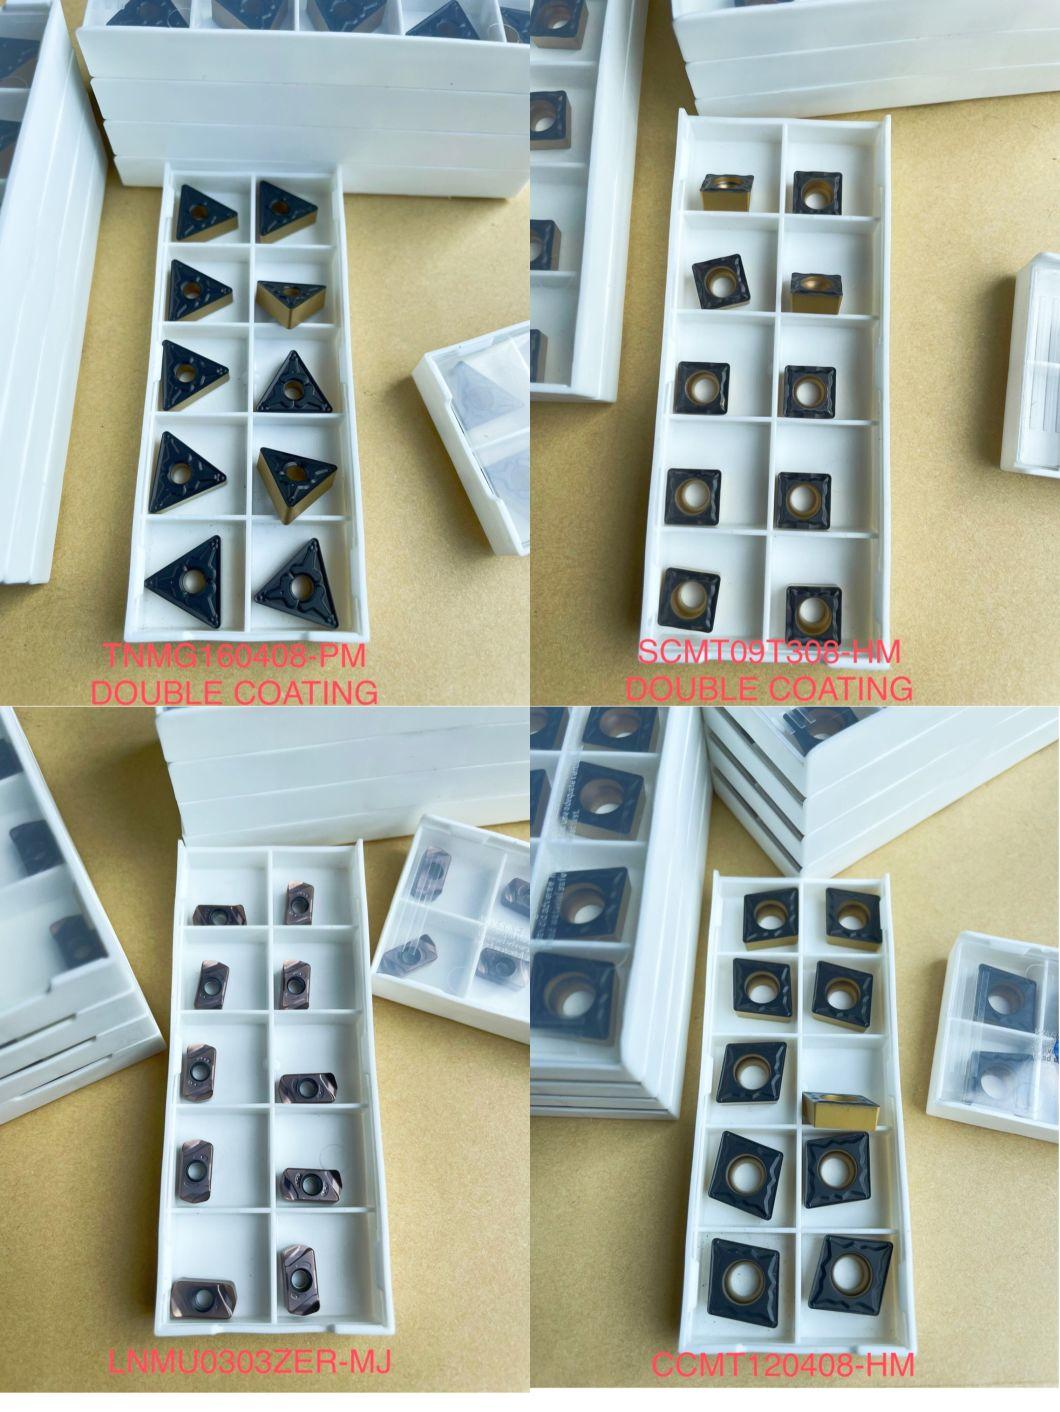 CNC High Quality Tungsten Solid Carbide Insert Vbmt for Stainless Steel